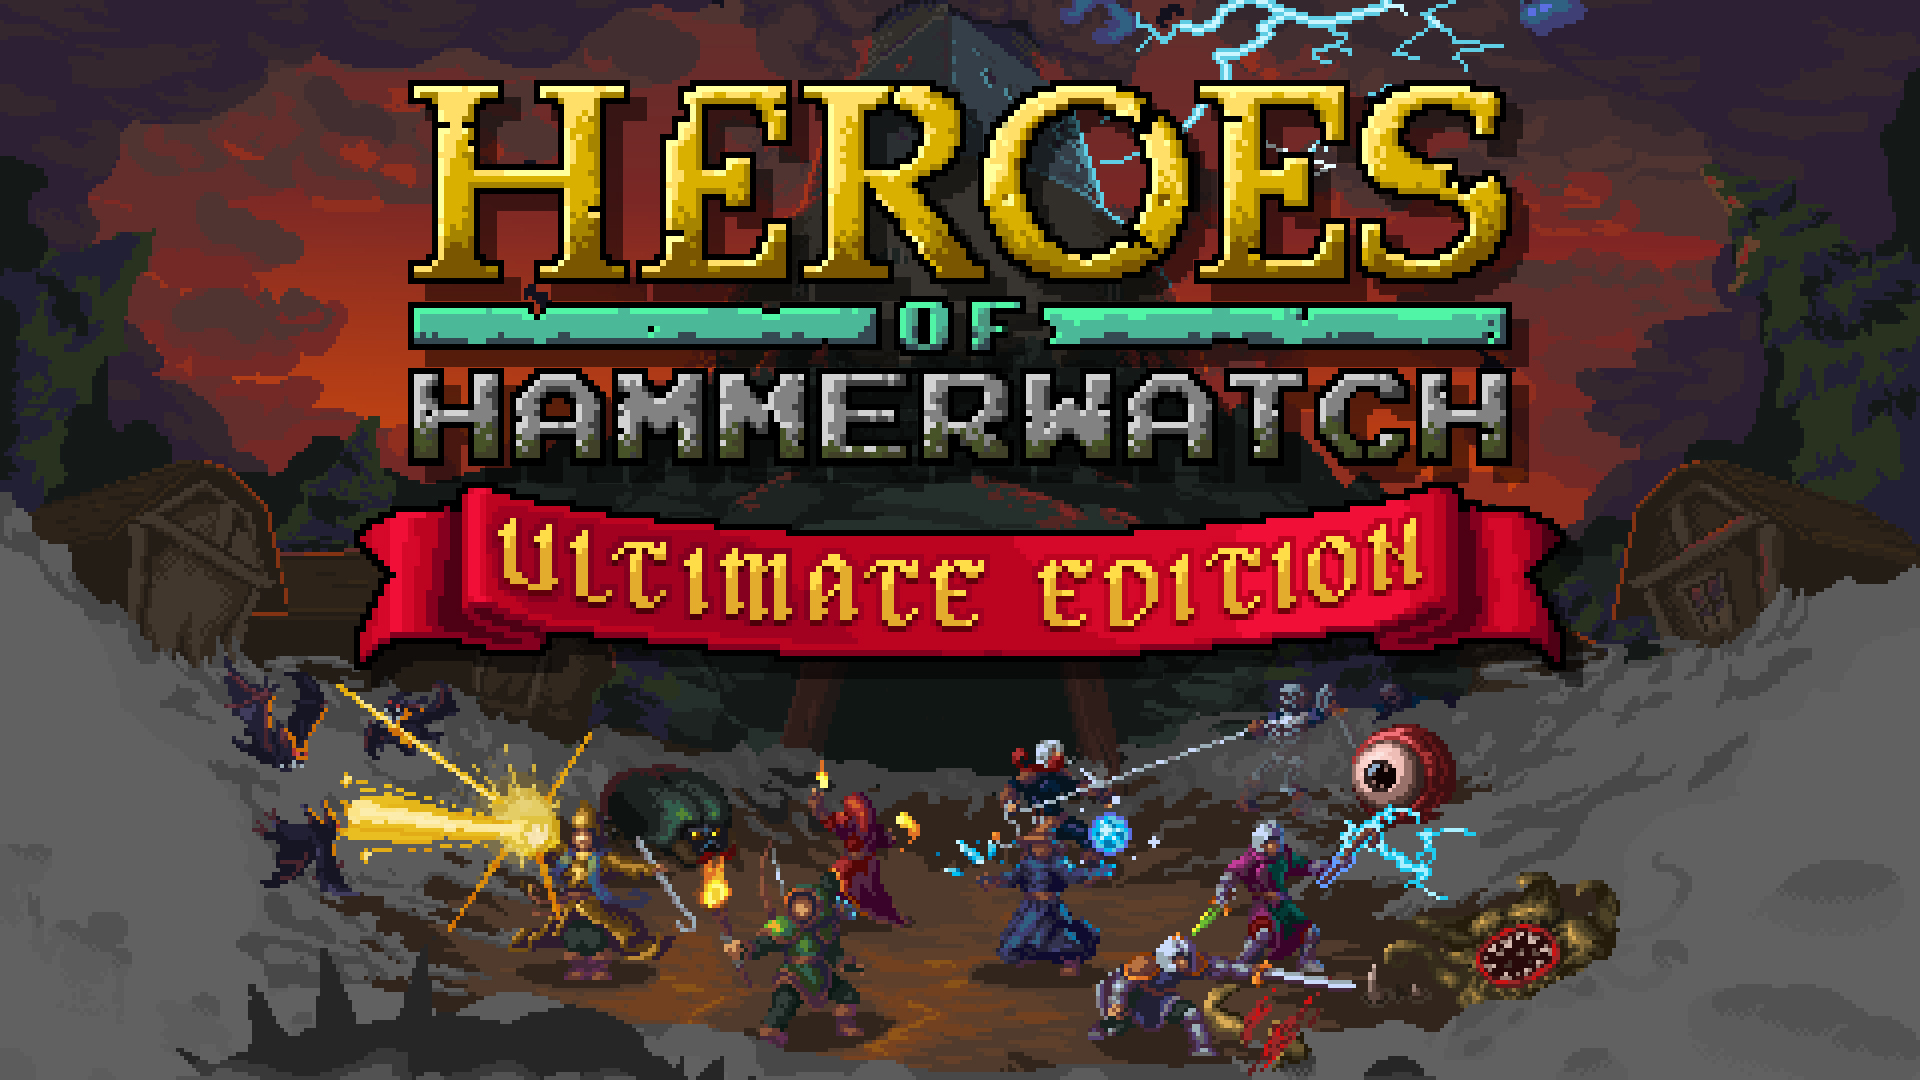 heroes of hammerwatch lights out puzzle solver